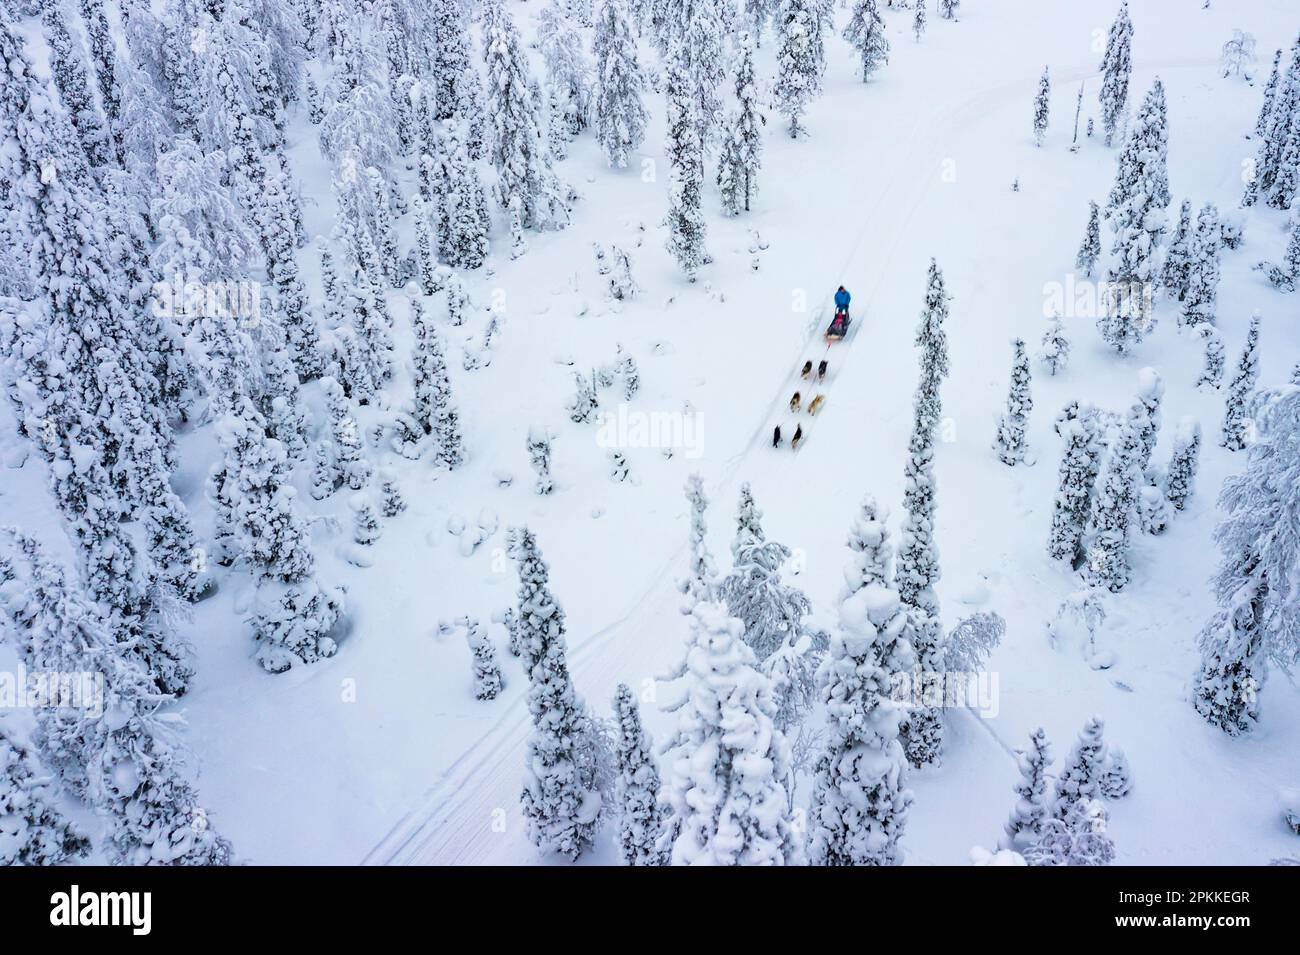 Aerial view of tourists dog sledding in the snowy forest, Lapland, Finland, Europe Stock Photo